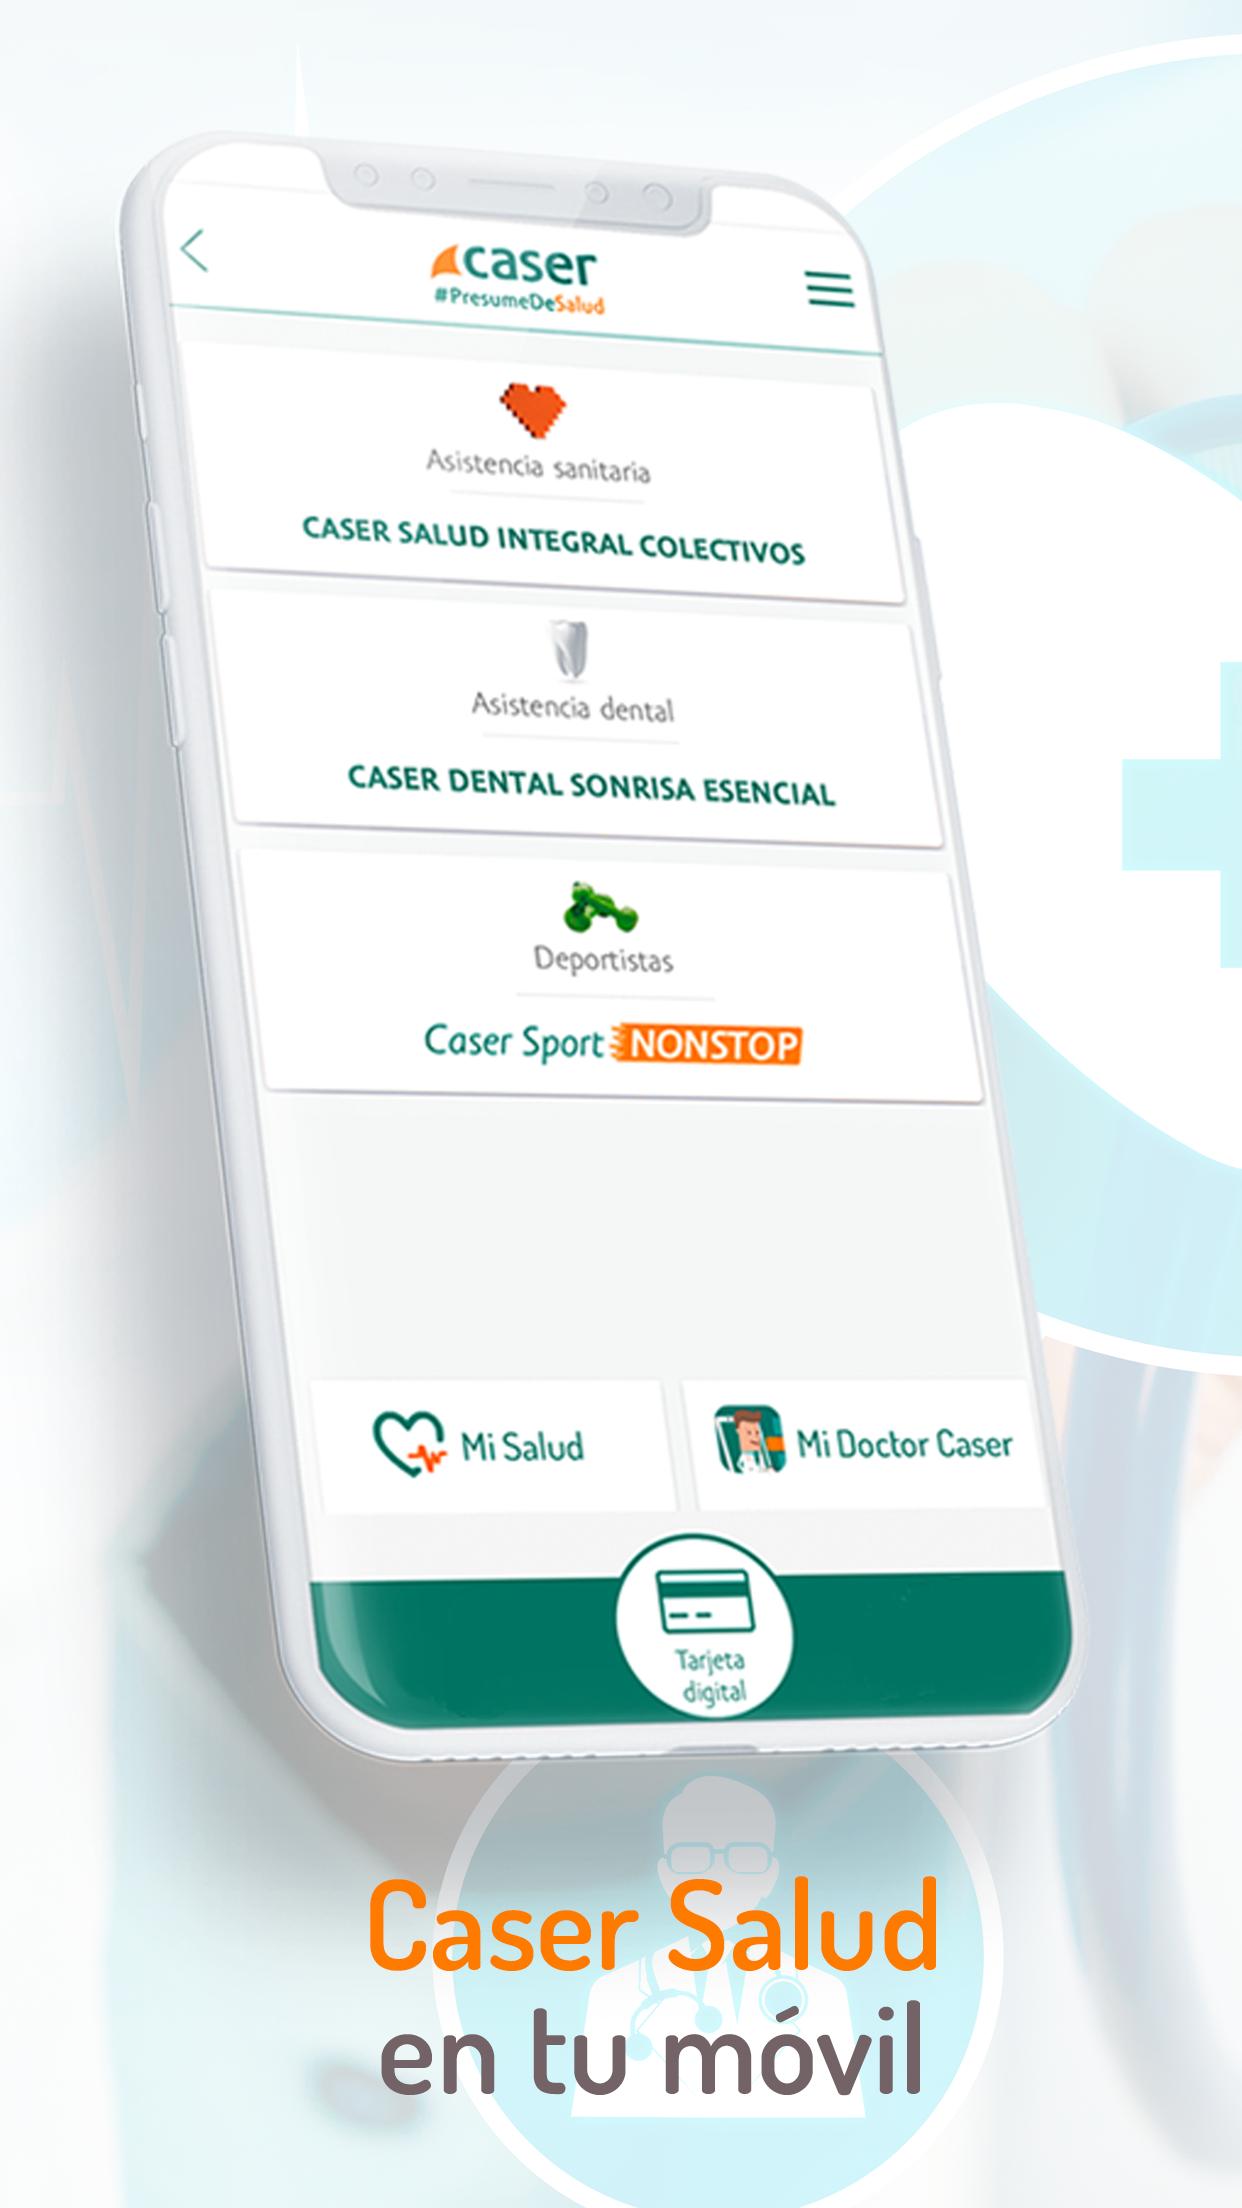 Caser Salud For Android Apk Download